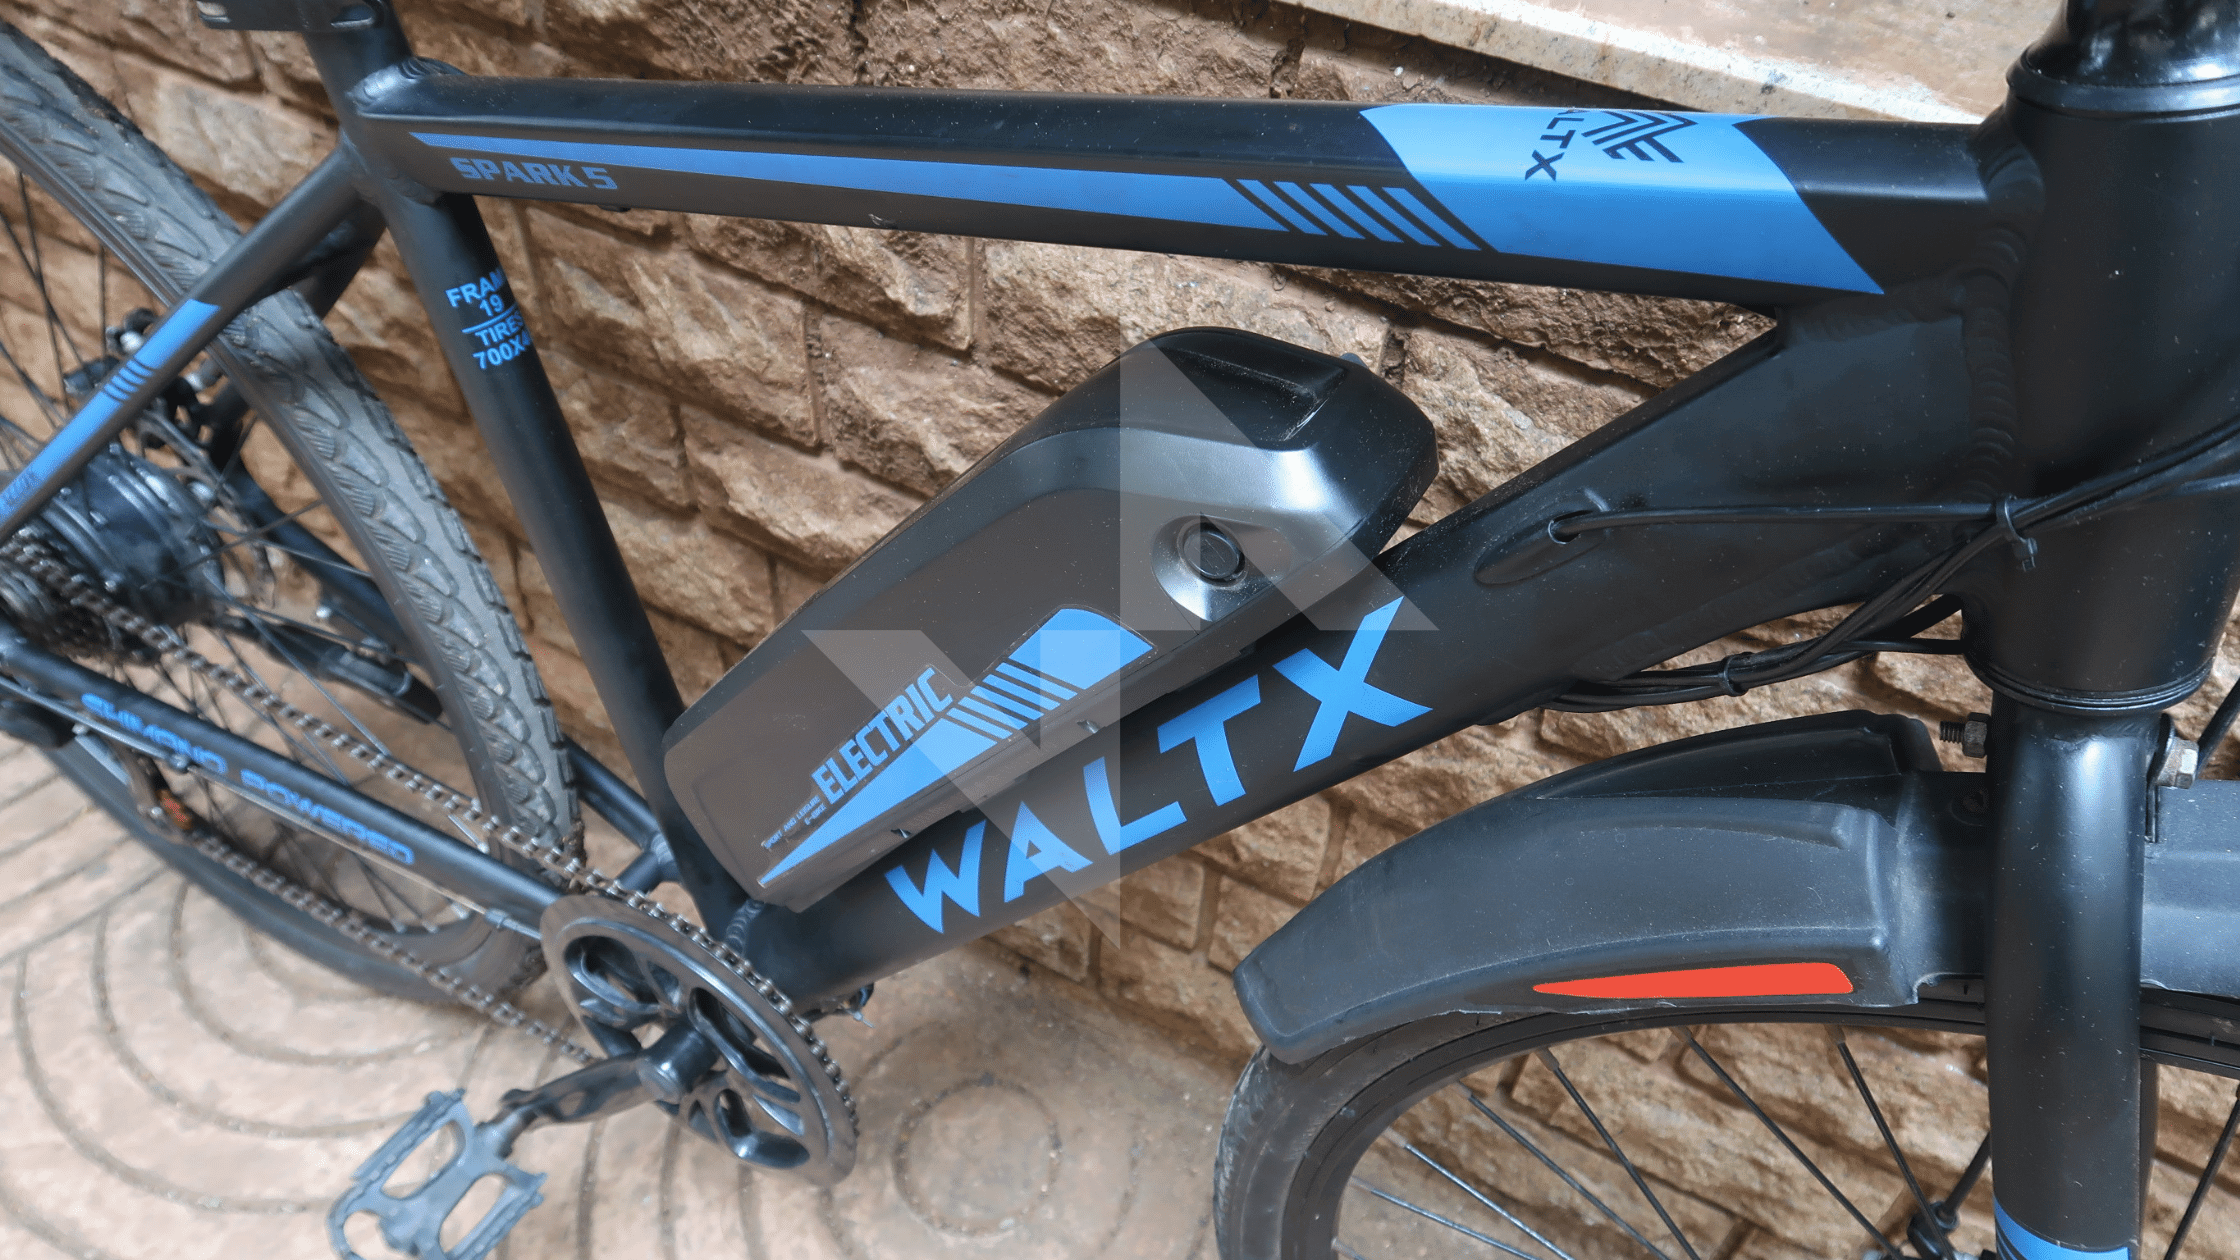 Waltx Spark 5 Review